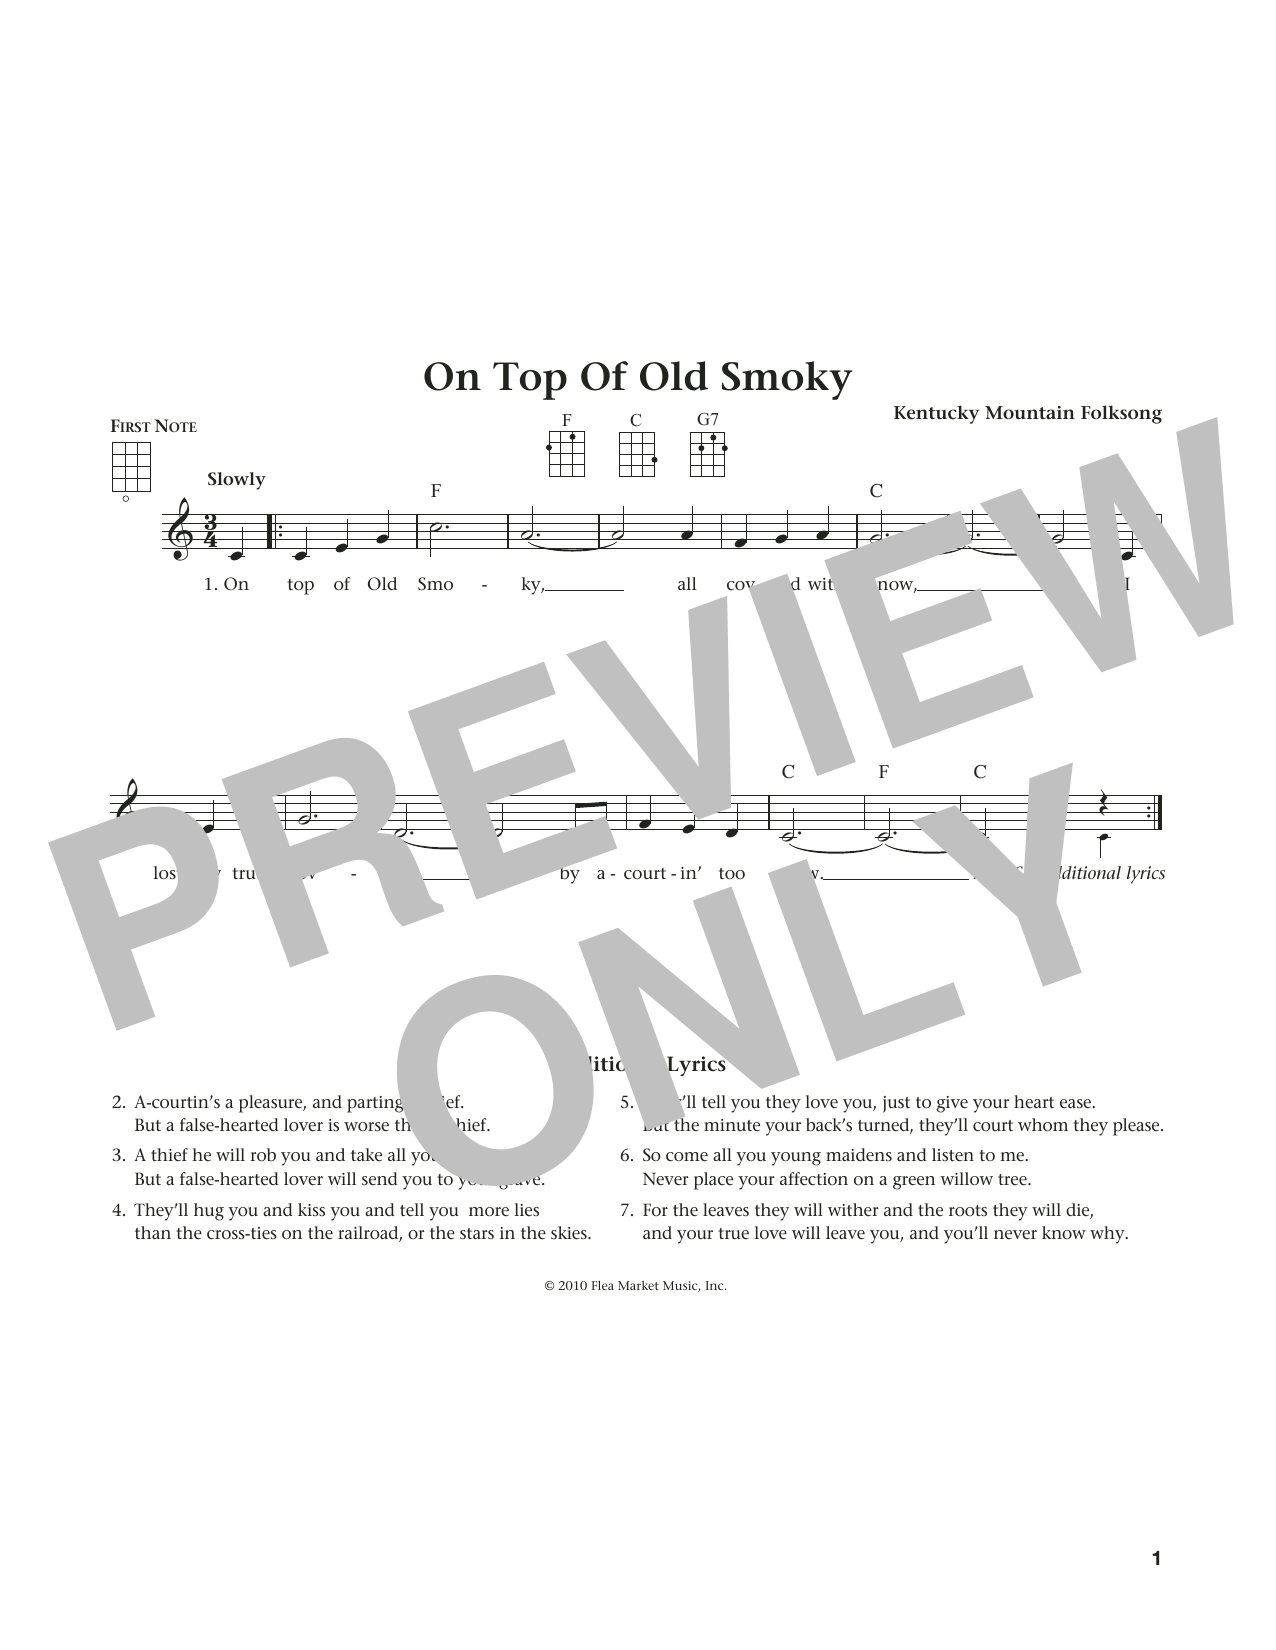 Download Kentucky Mountain Folksong On Top Of Old Smoky (from The Daily Uku Sheet Music